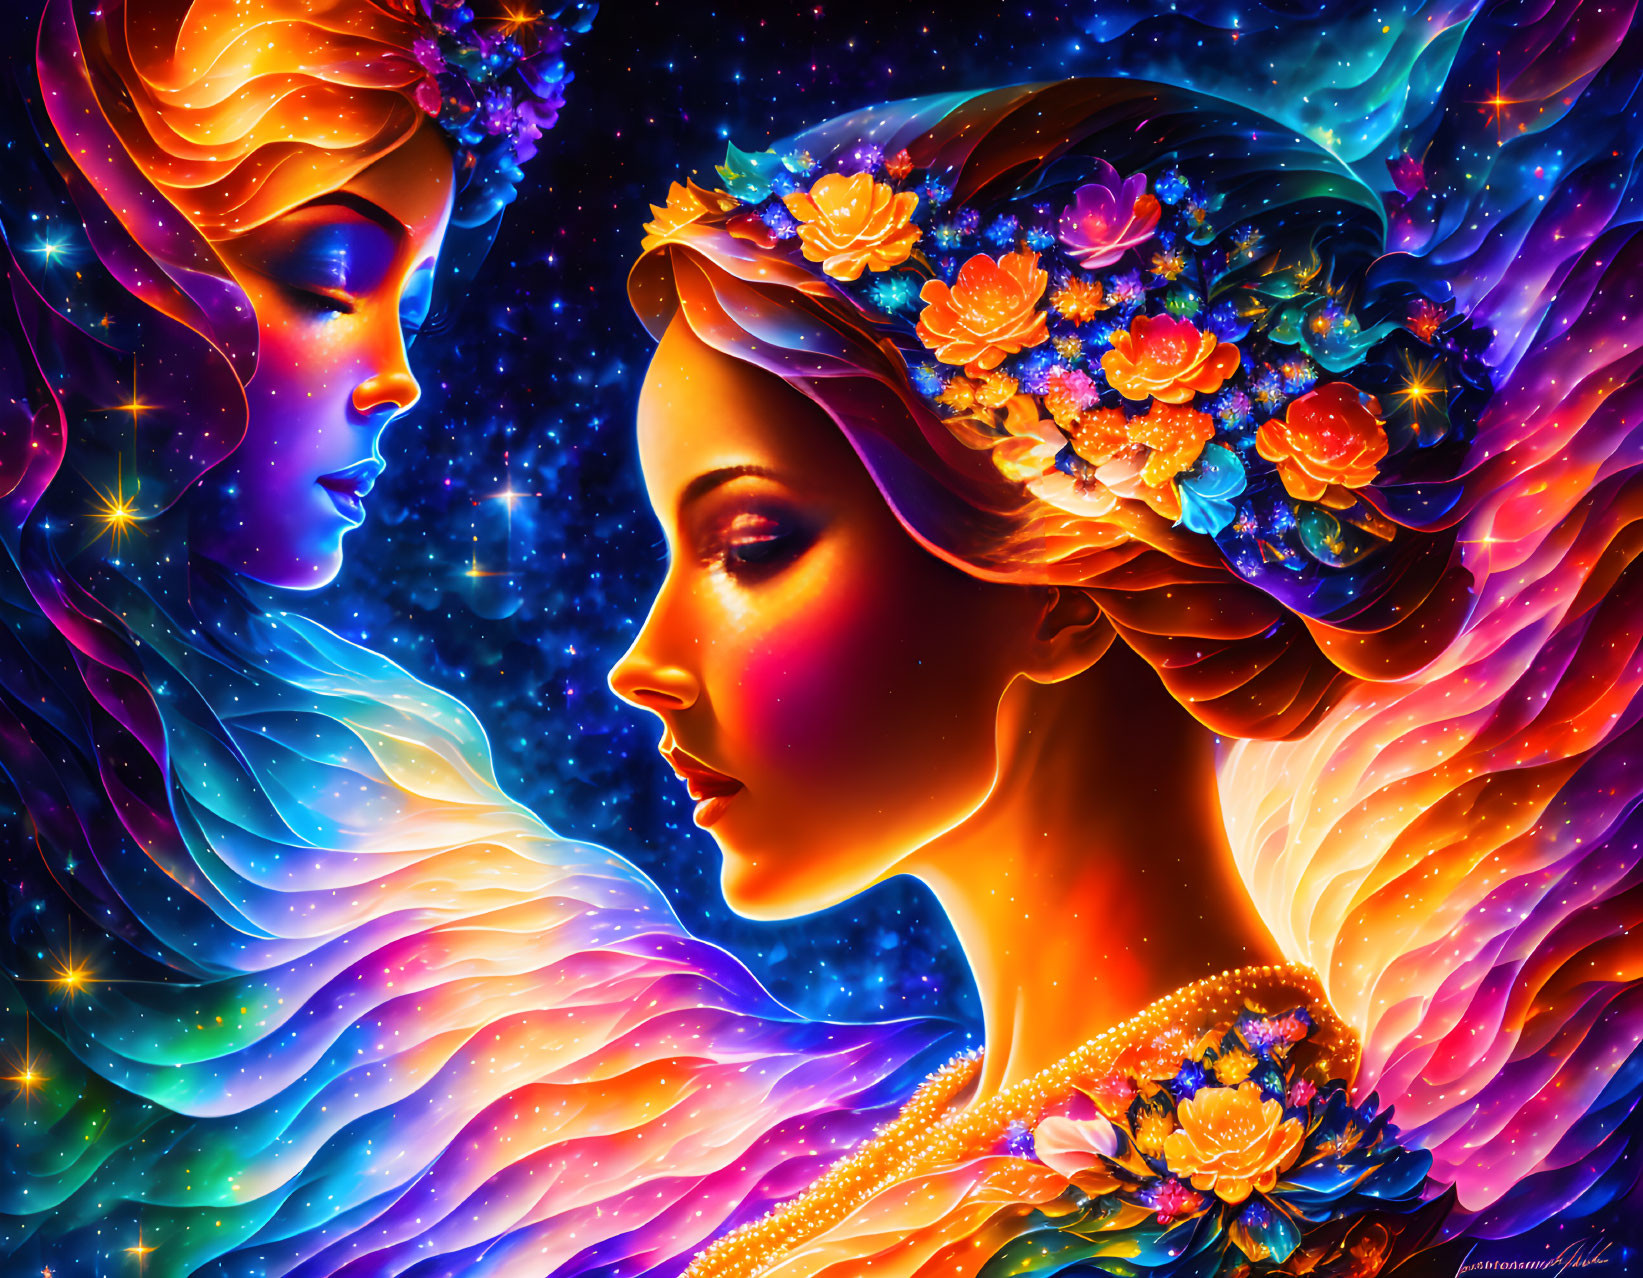 Colorful digital art: Two female profiles with floral crowns on cosmic backdrop.